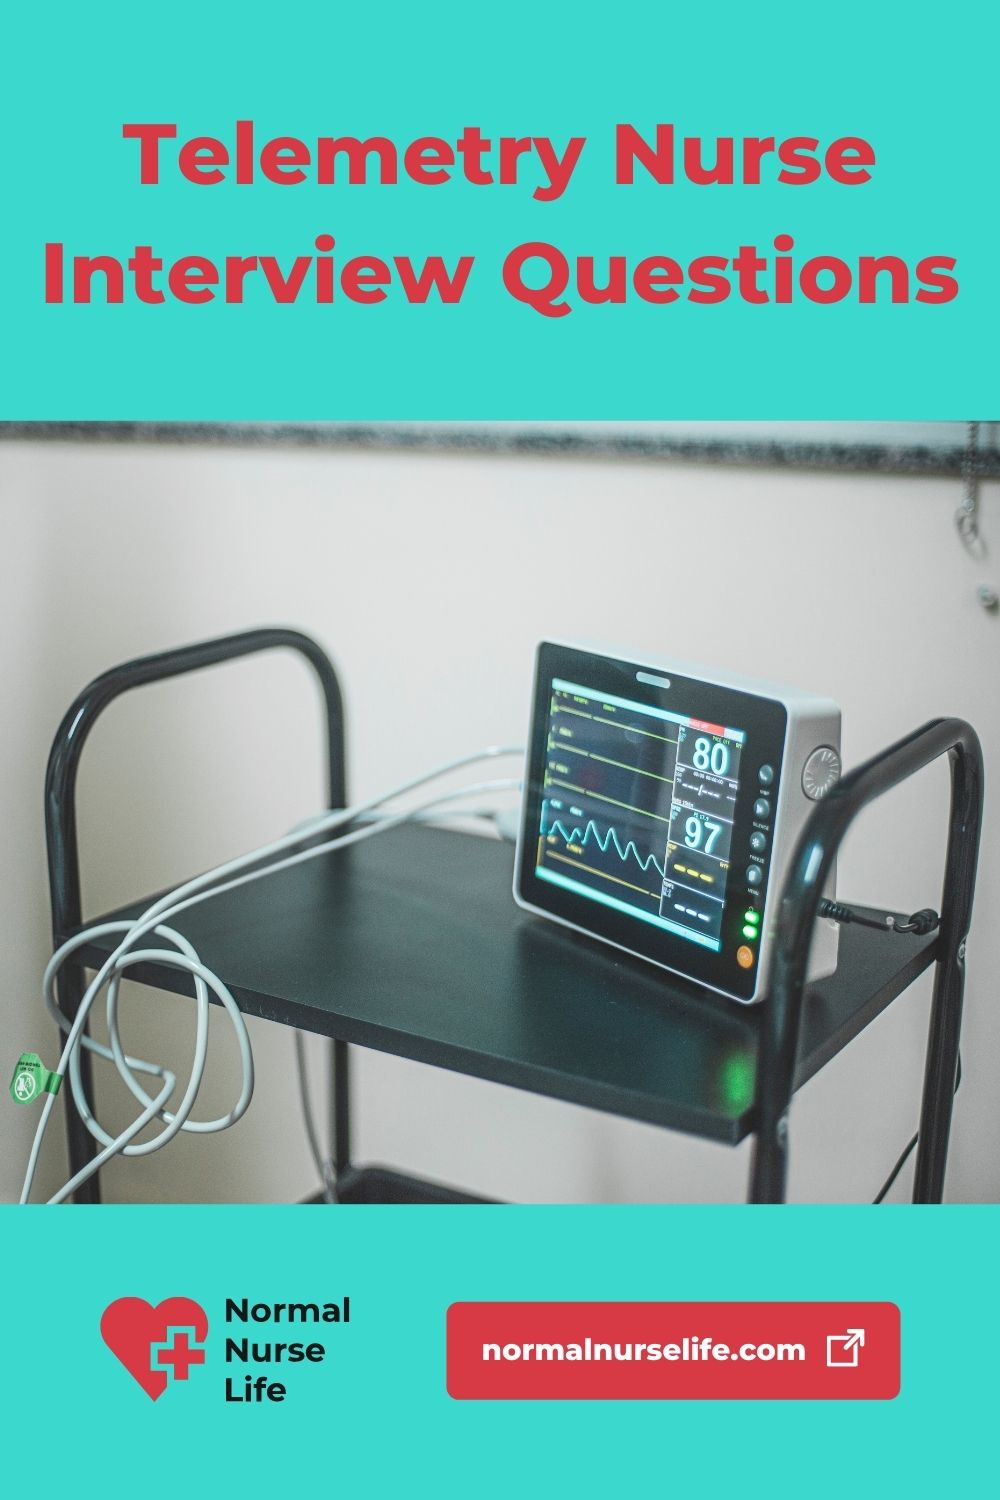 Interview questions for telemetry nurses